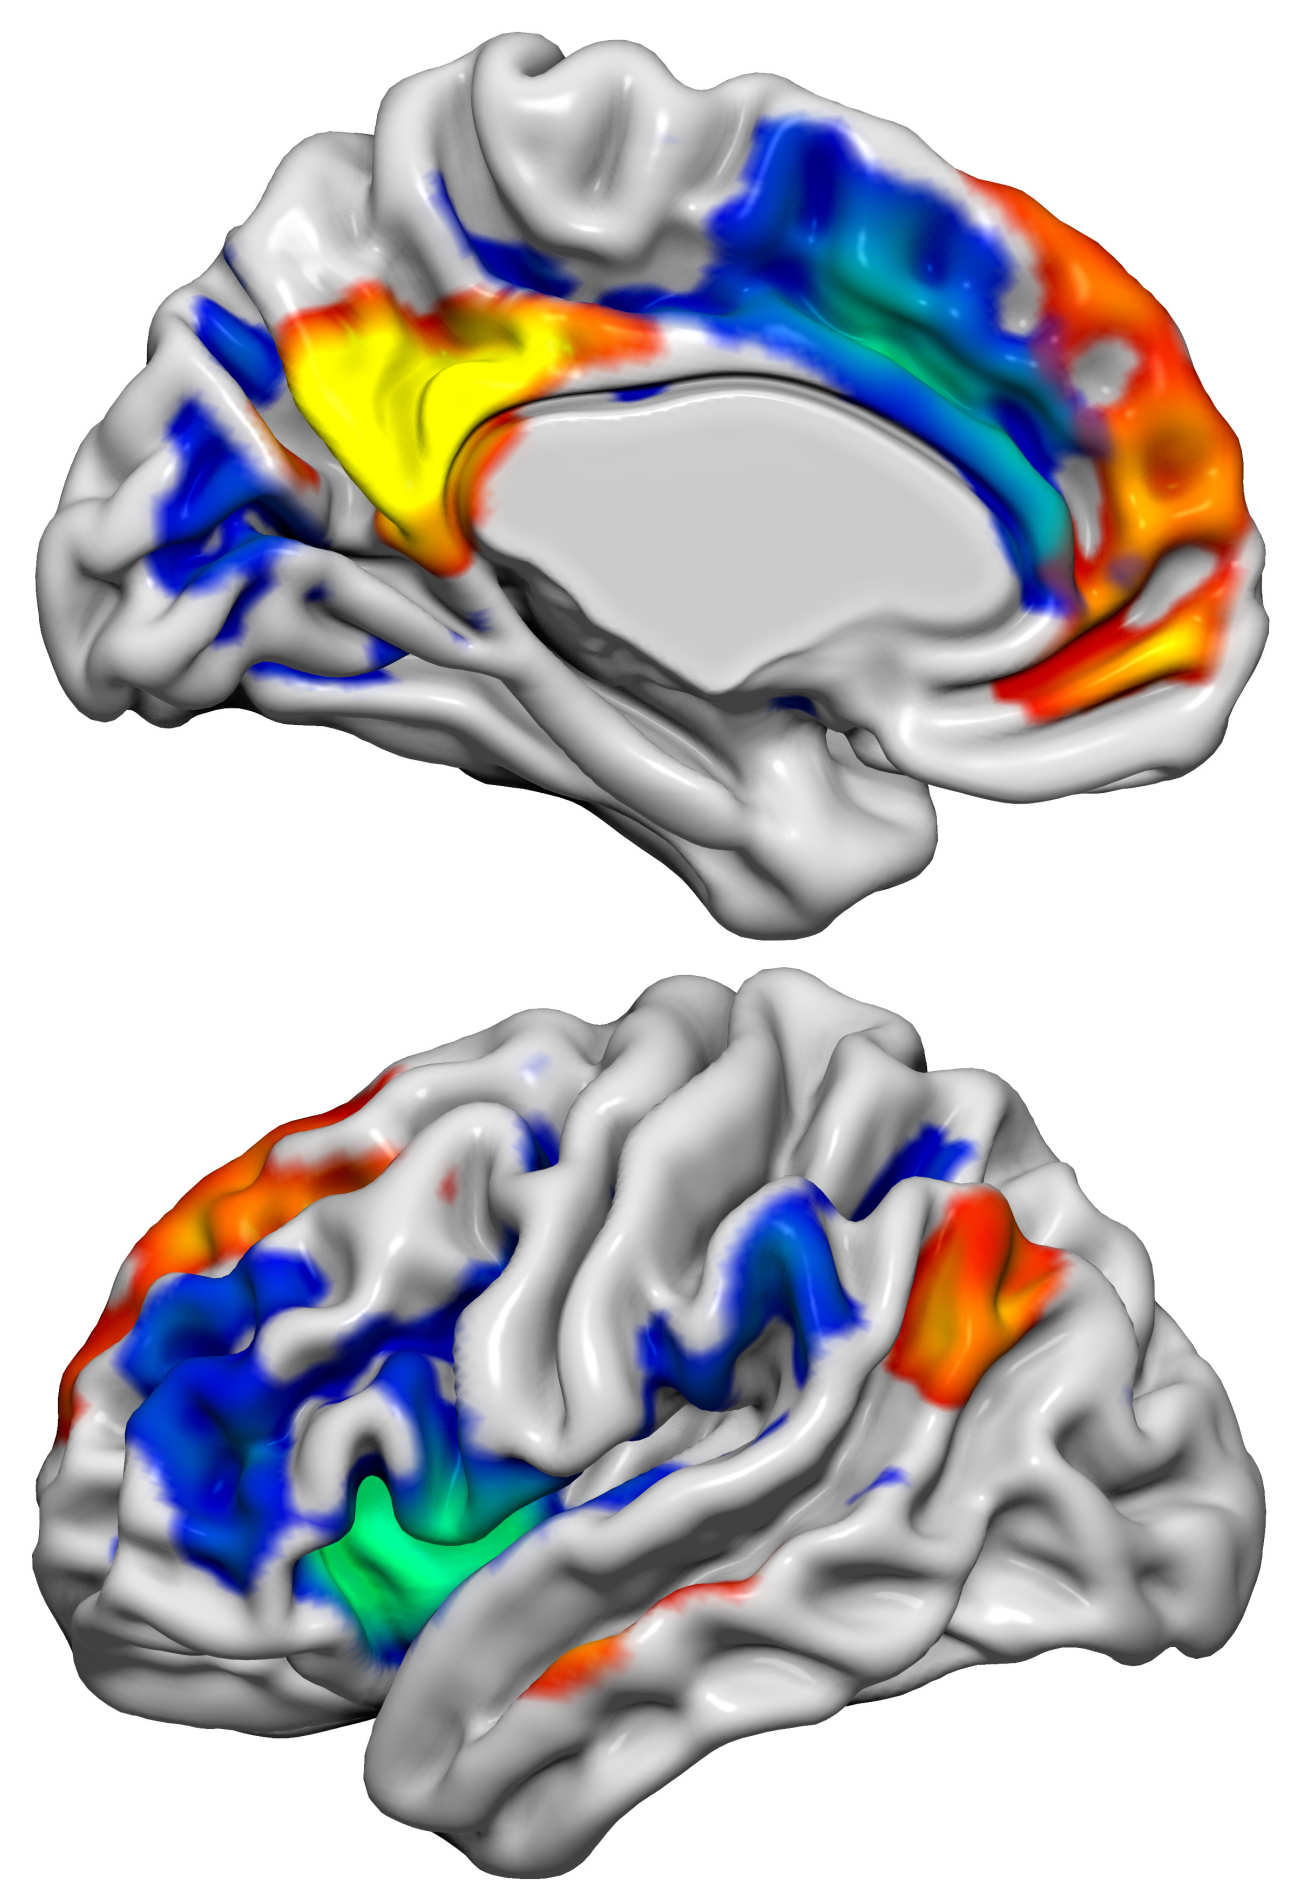 This image shows the Default Mode Network (red/yellow) and the Salience Network (blue/green) which have important roles in social and emotional function. These two networks in the brain were altered when the volunteers received the hormone kisspeptin, and this was associated with changes in brain activity linked to sexual aversion and sexual arousal.